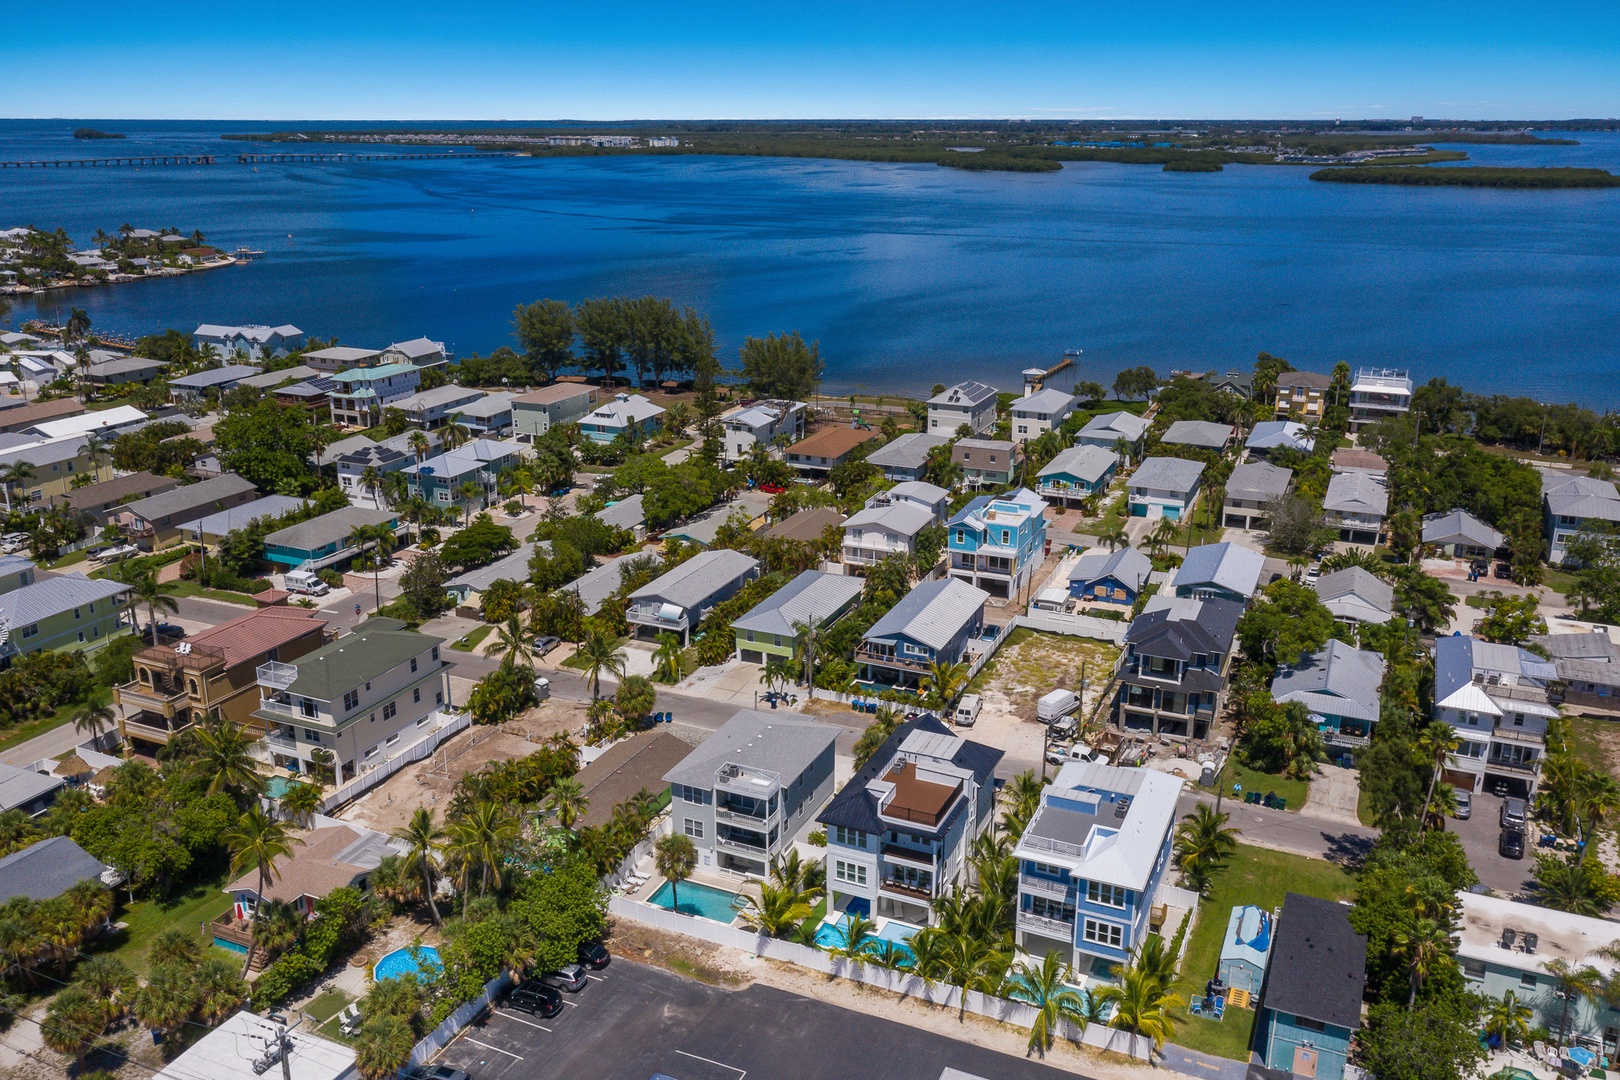 What A Catch - By Anna Maria Island Accommodations (2)